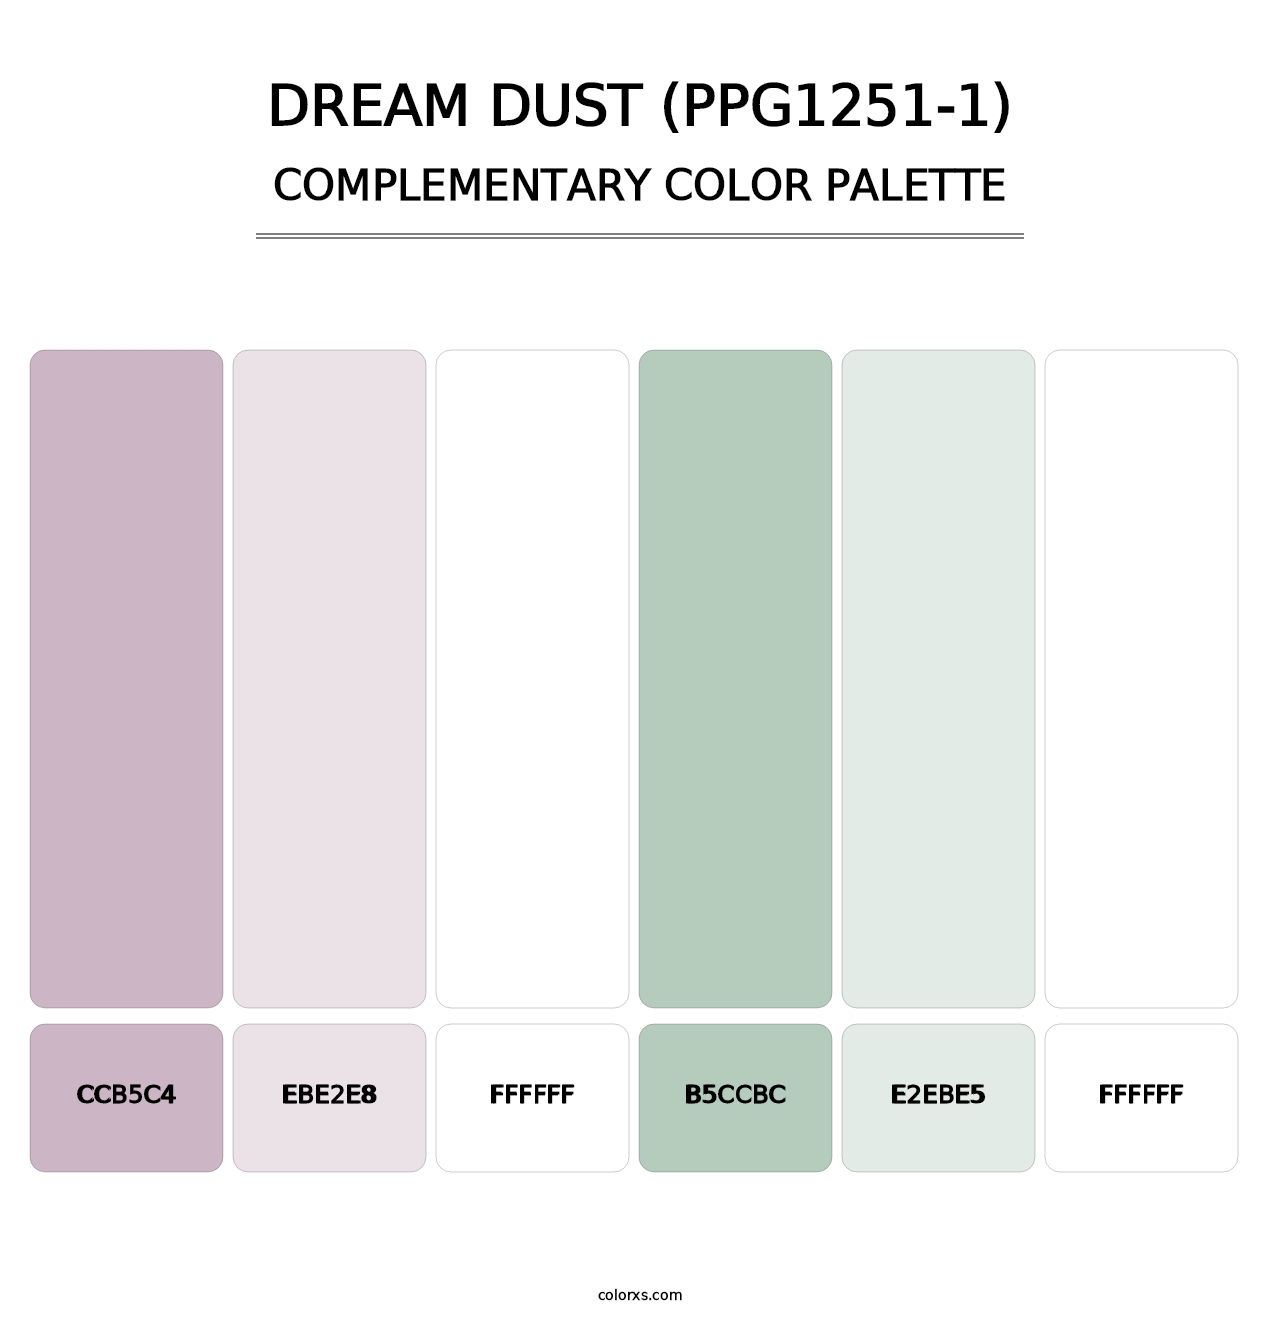 Dream Dust (PPG1251-1) - Complementary Color Palette